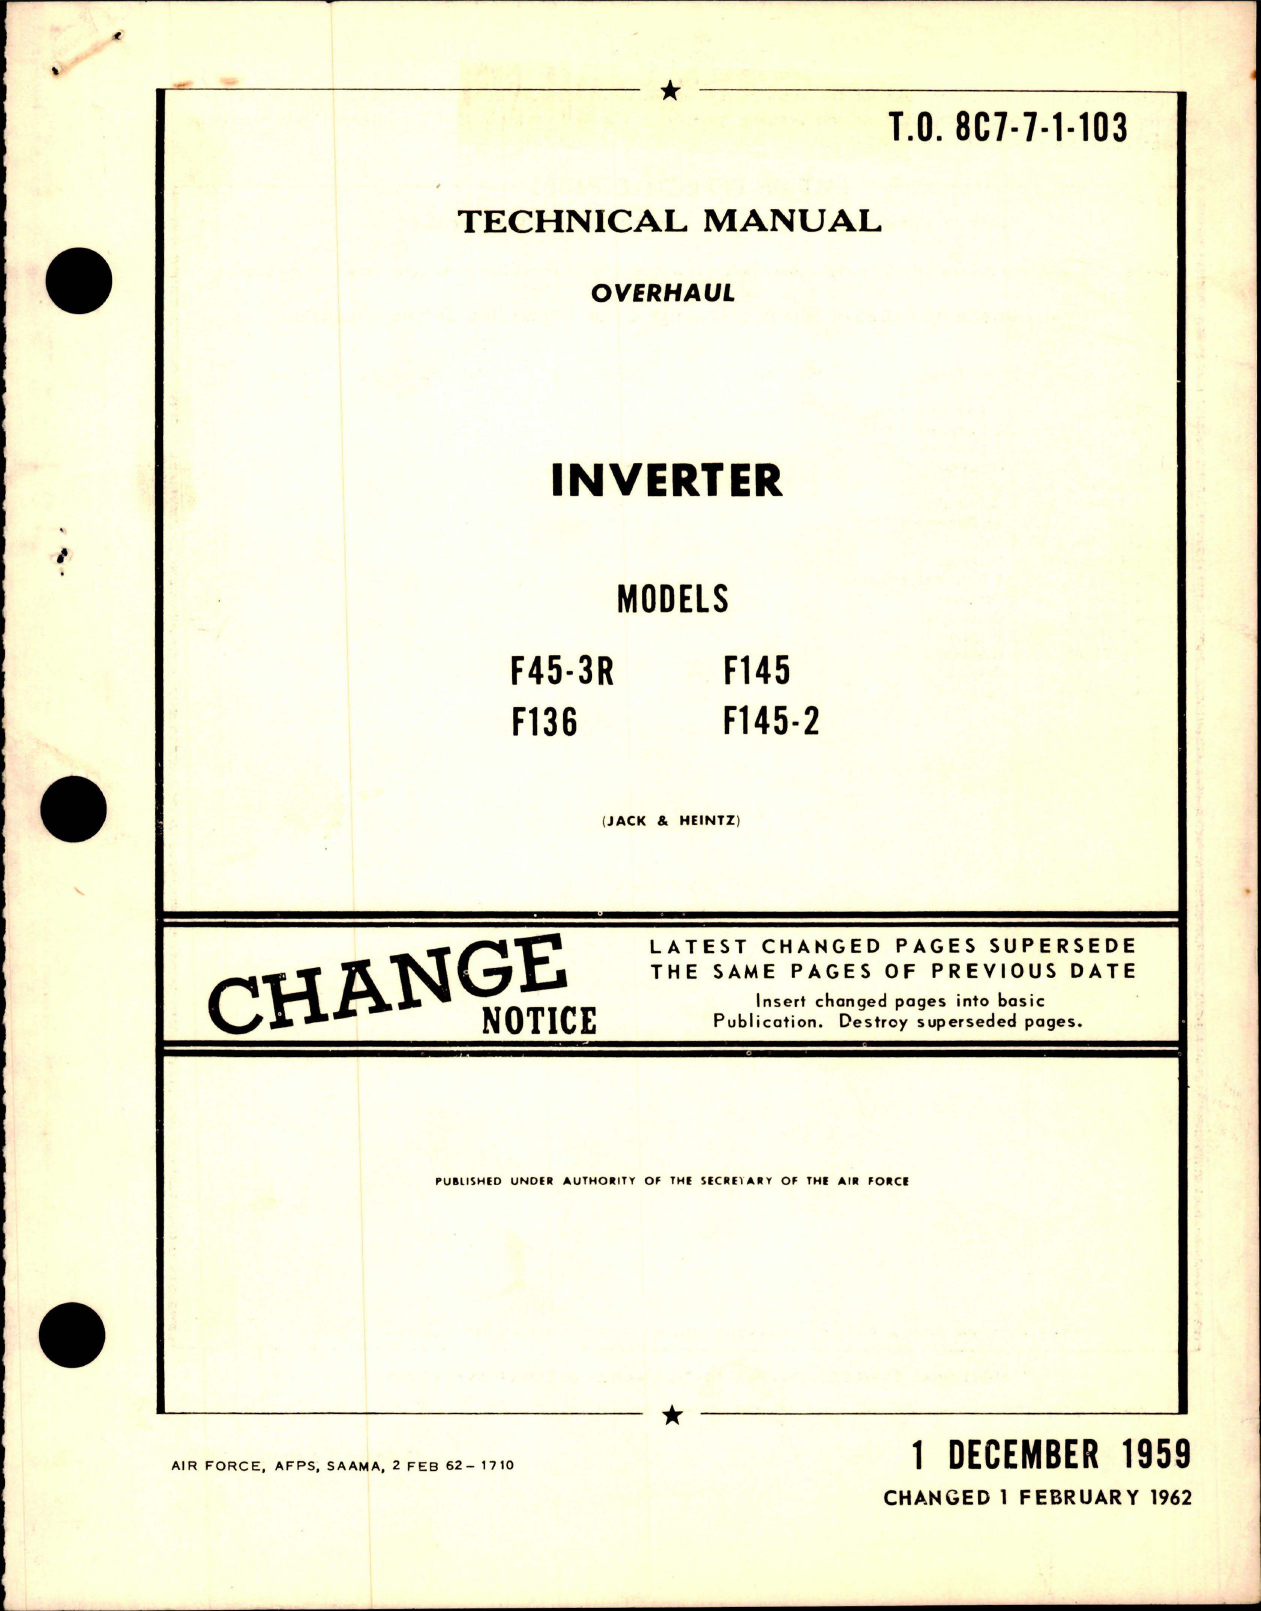 Sample page 1 from AirCorps Library document: Overhaul for Inverter - Models F45-3R, F136, F145, and F145-2 